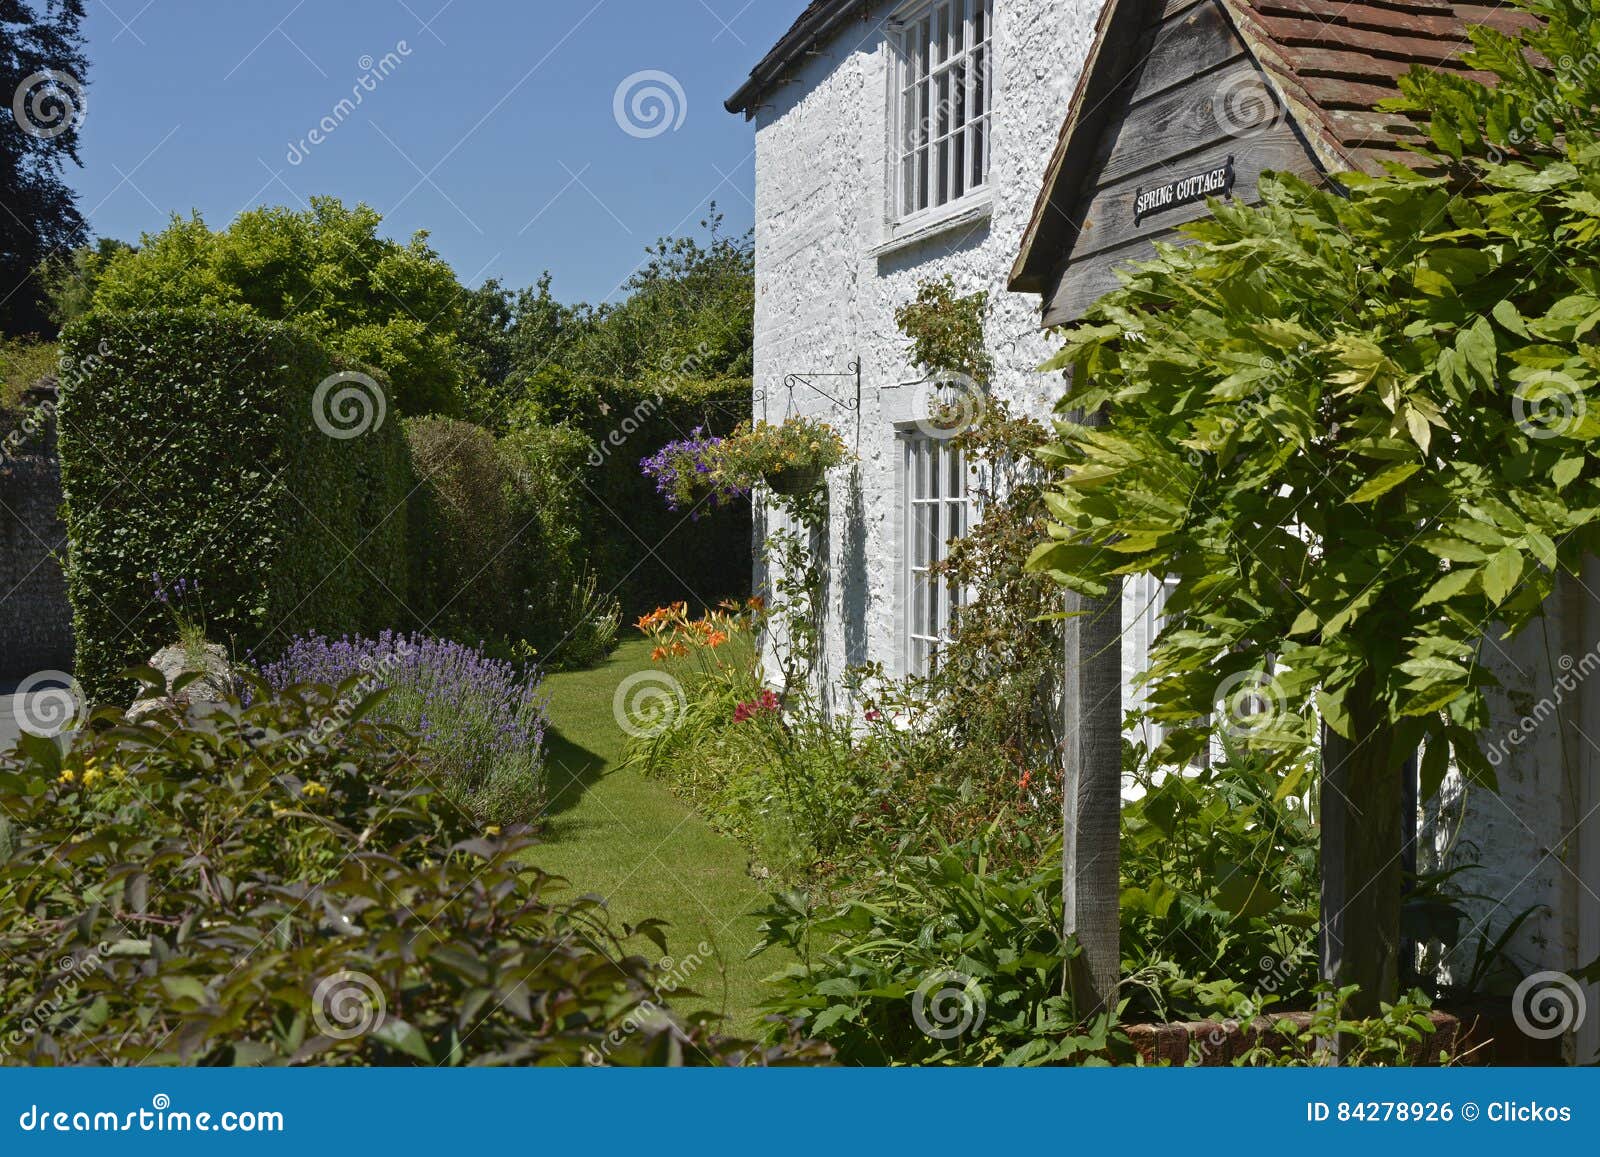 English Cottage Garden Sussex England Editorial Photo Image Of